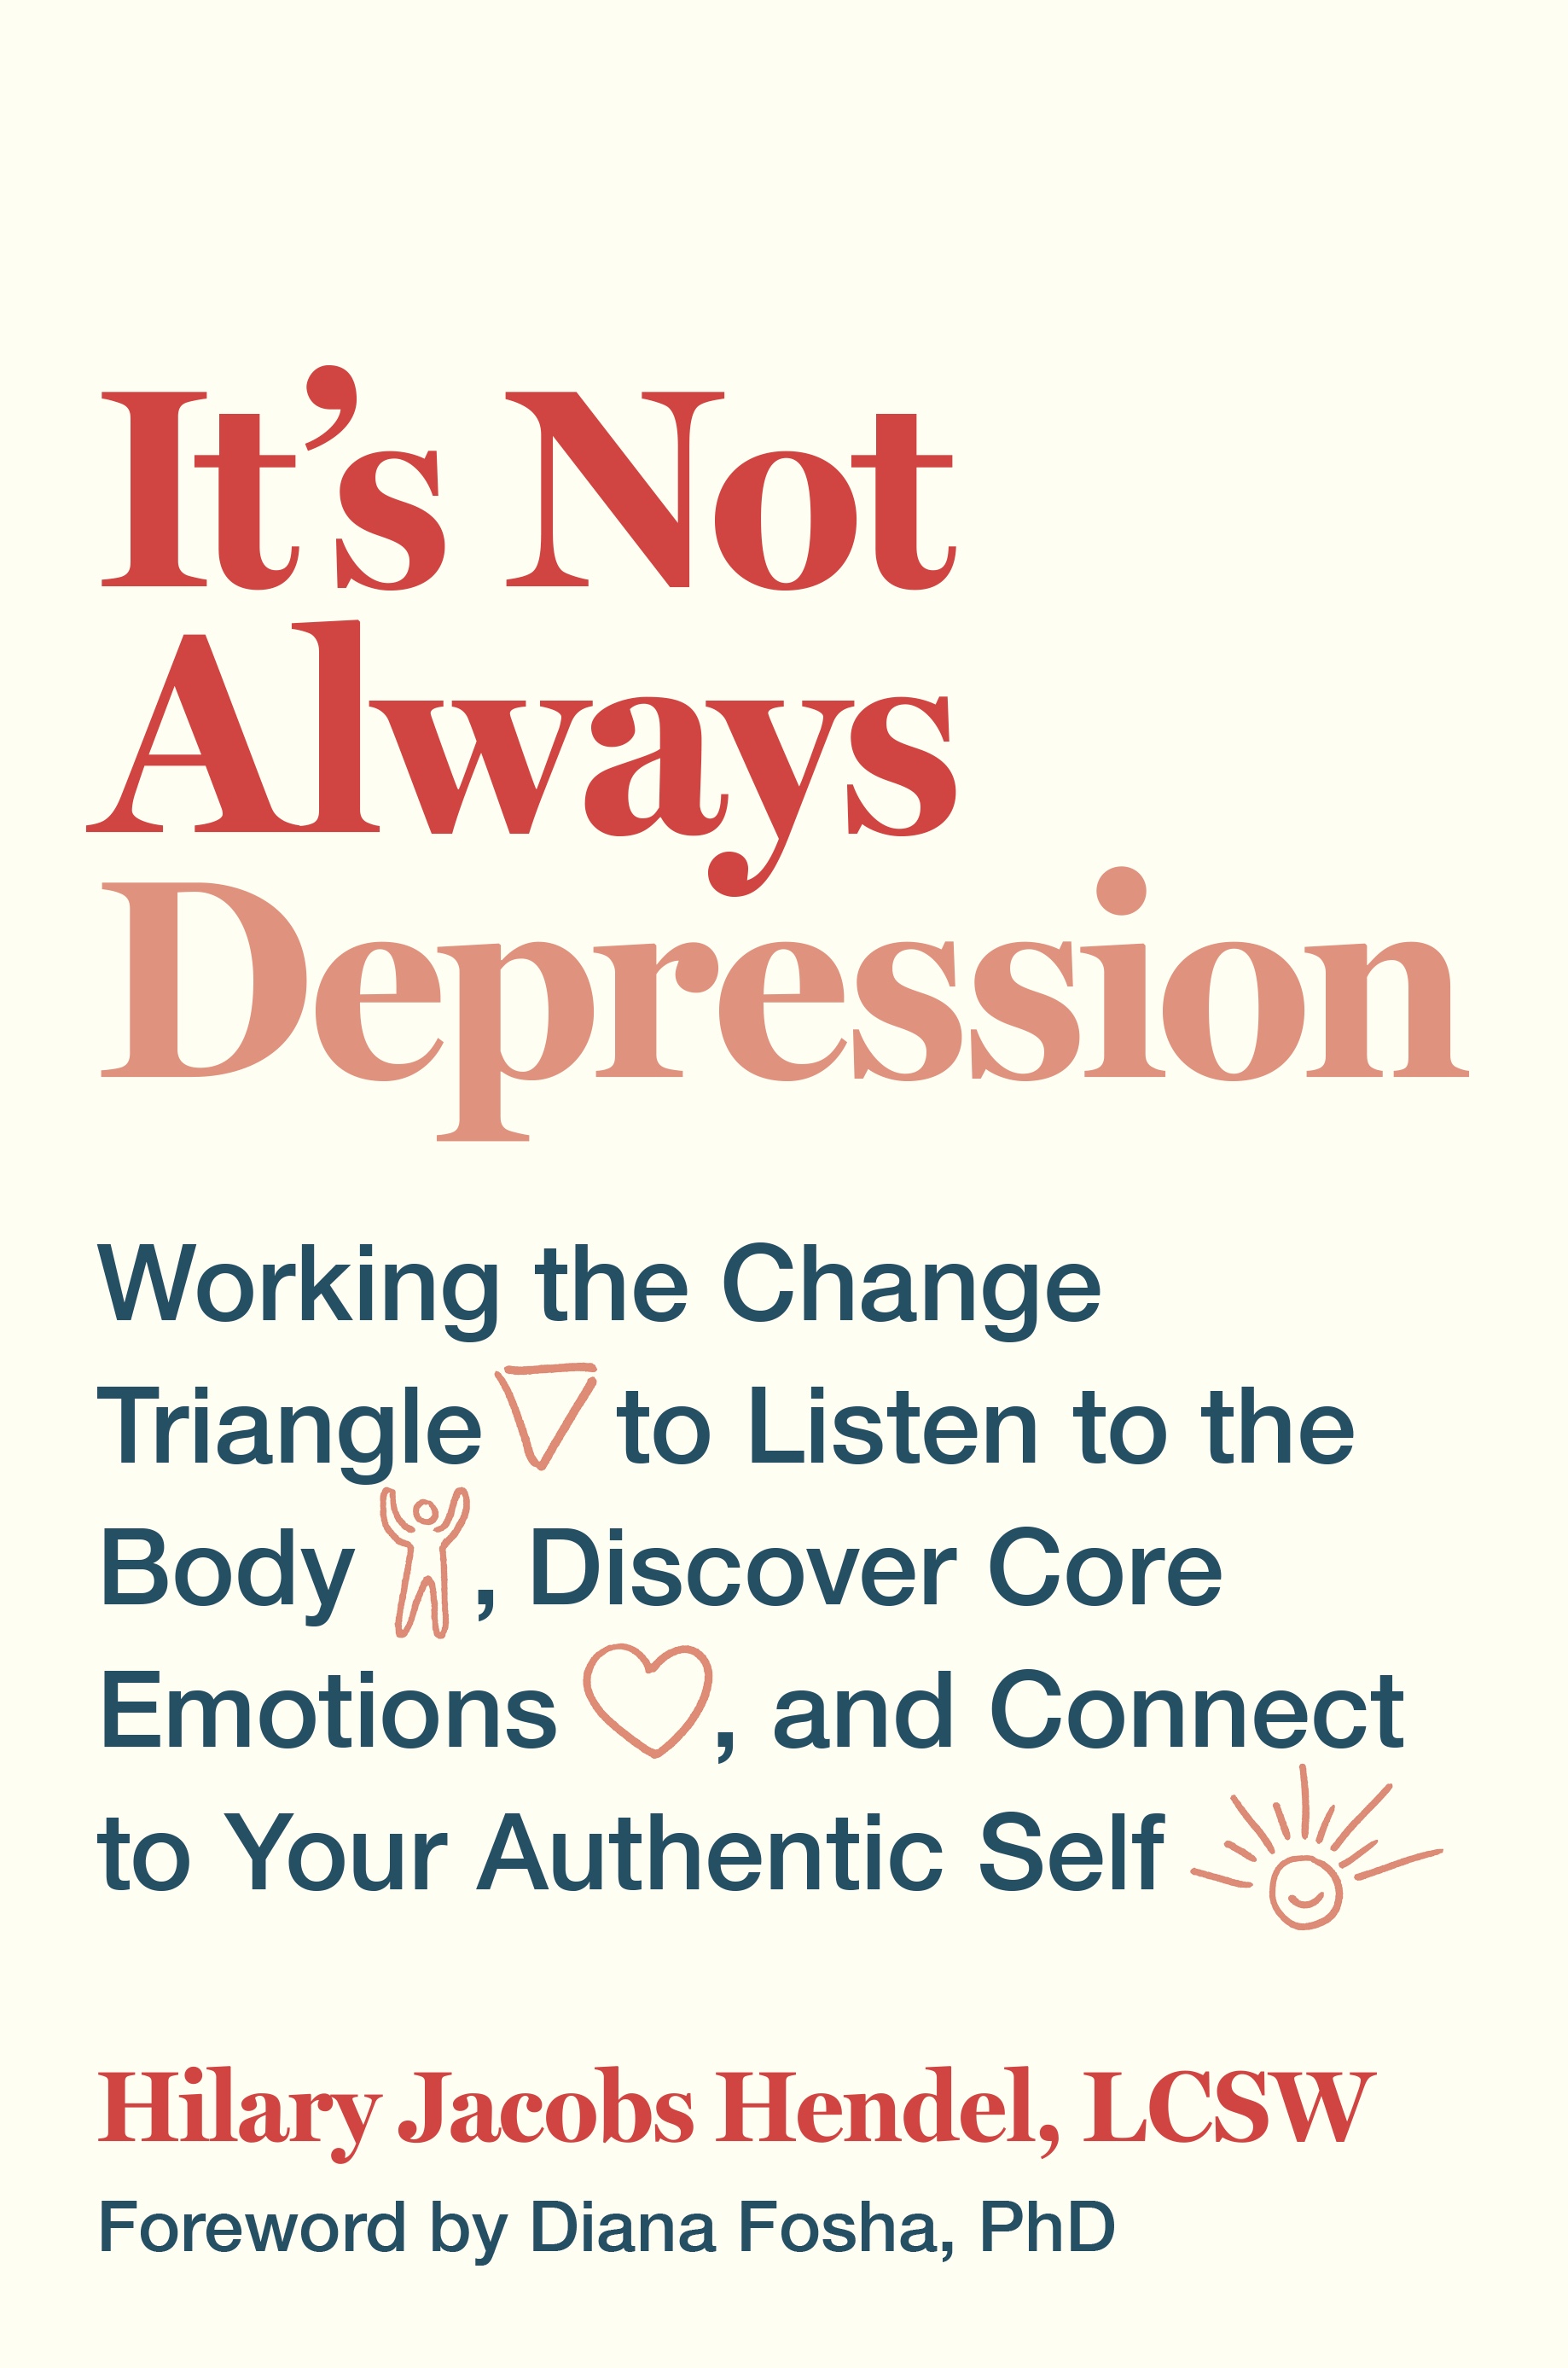 book cover for "It's Not Always Depression"